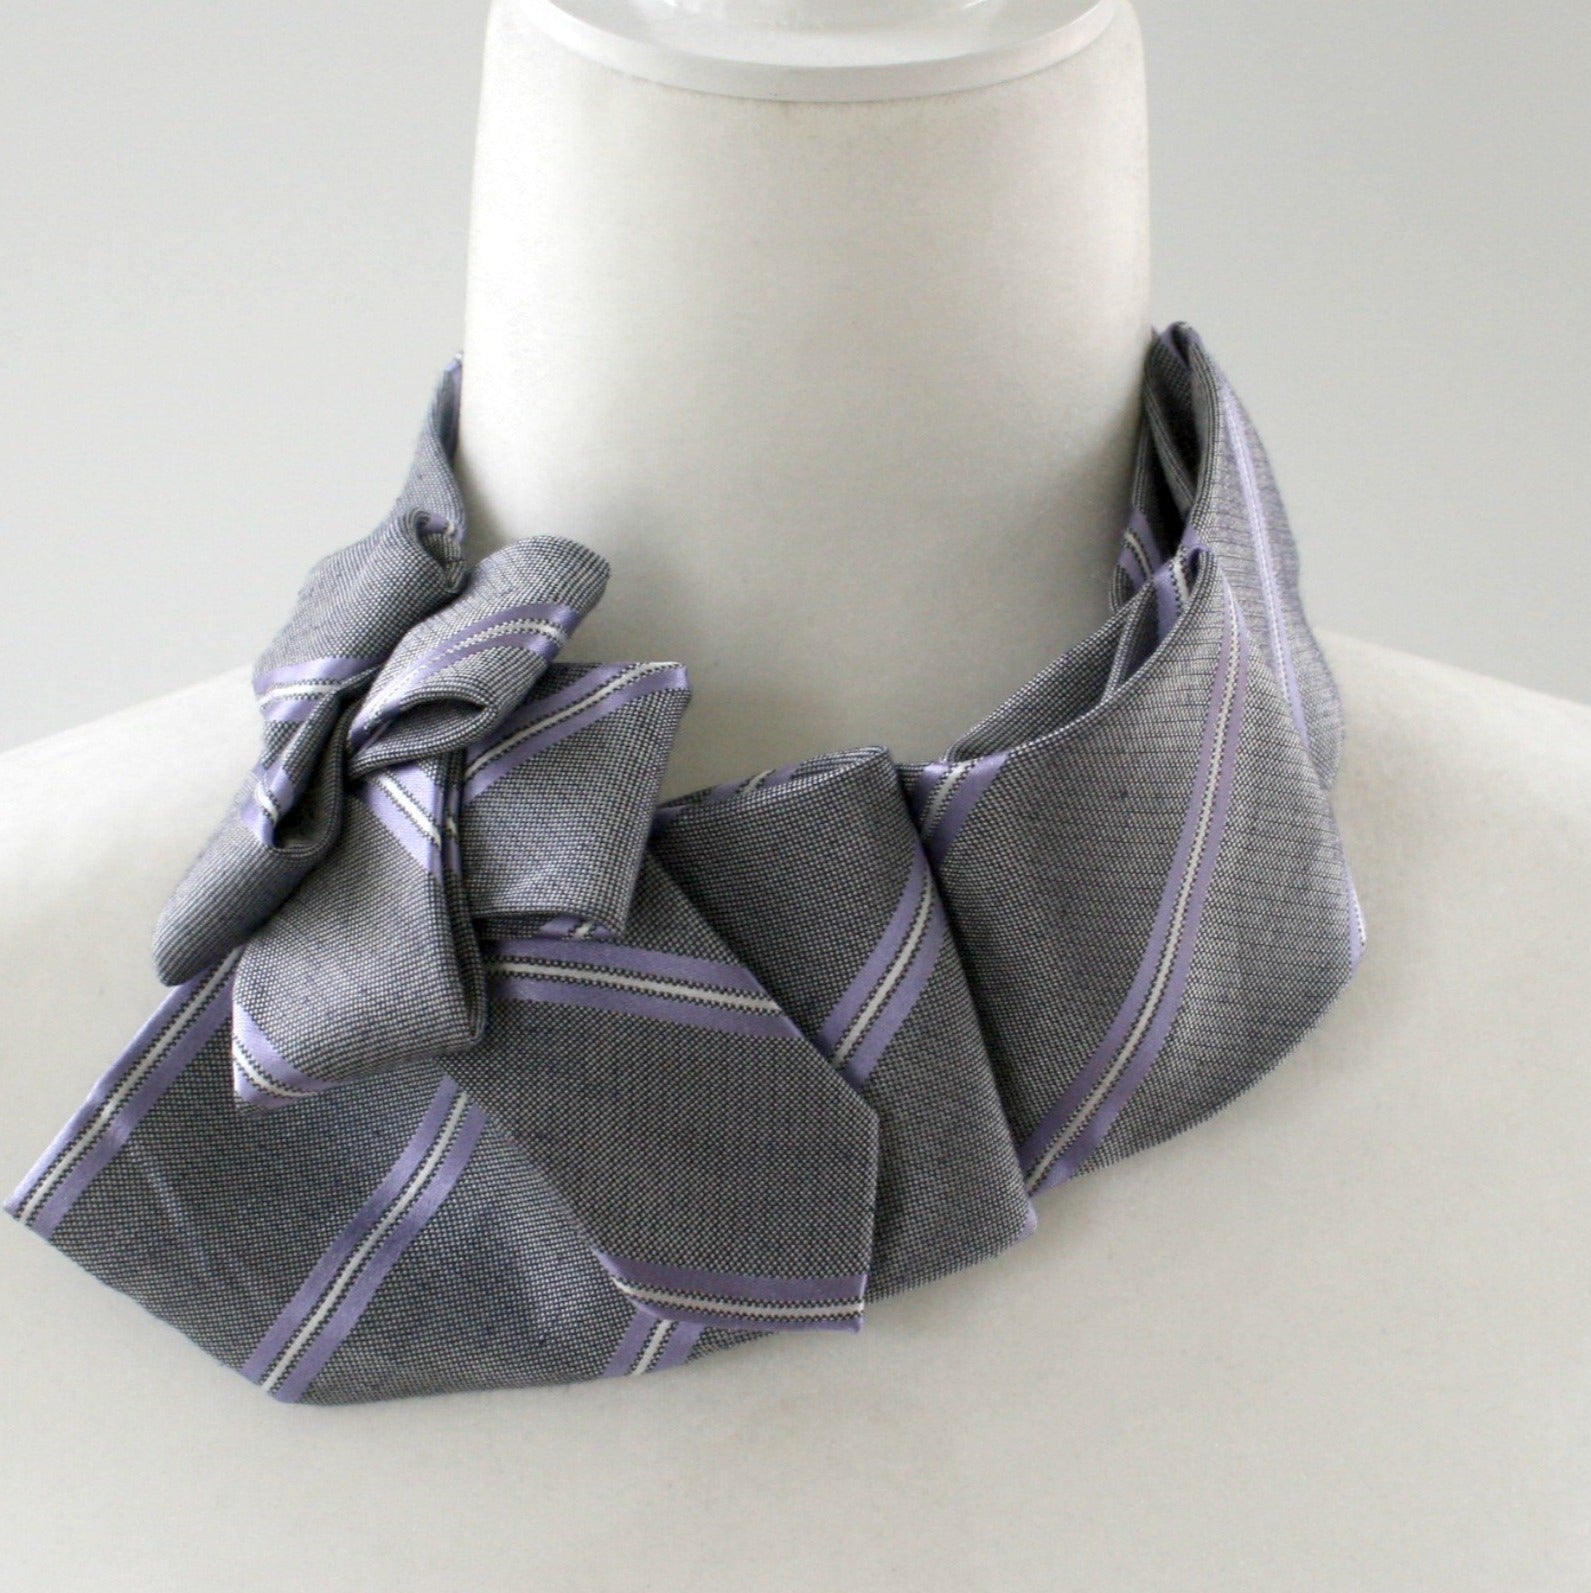 second way to wear ascot scarf